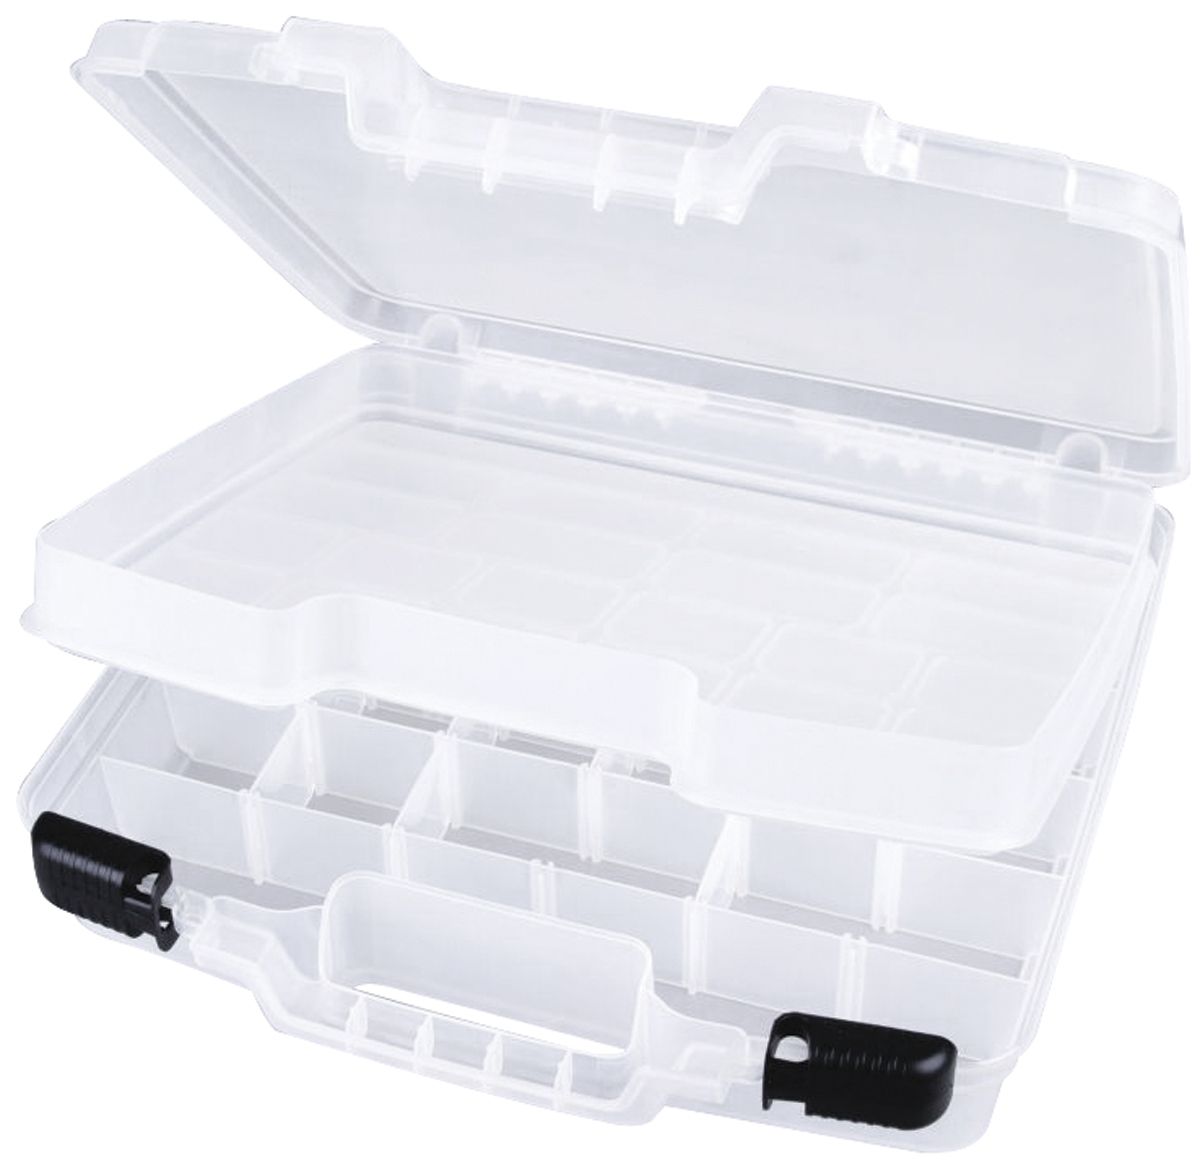 ArtBin Quick View Deep Base Carrying Case w/Lift-Out Tray-15"X3.25"X14.375" Translucent